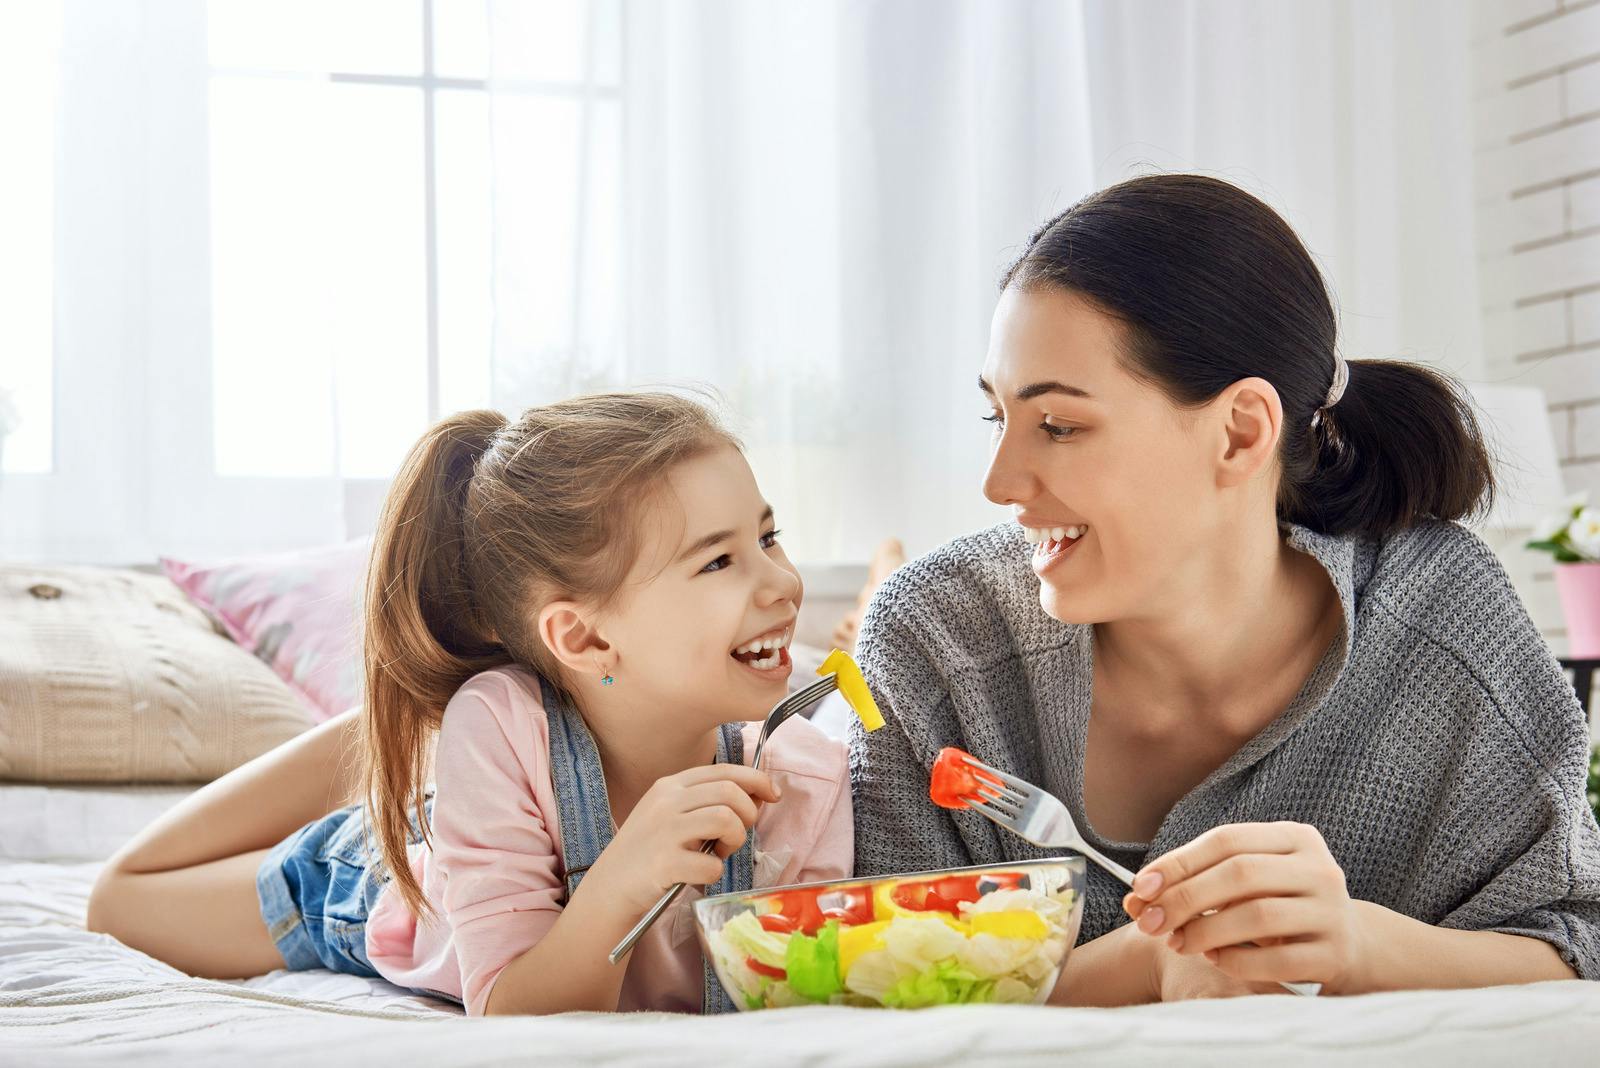 Mom and daughter laughing and eating food